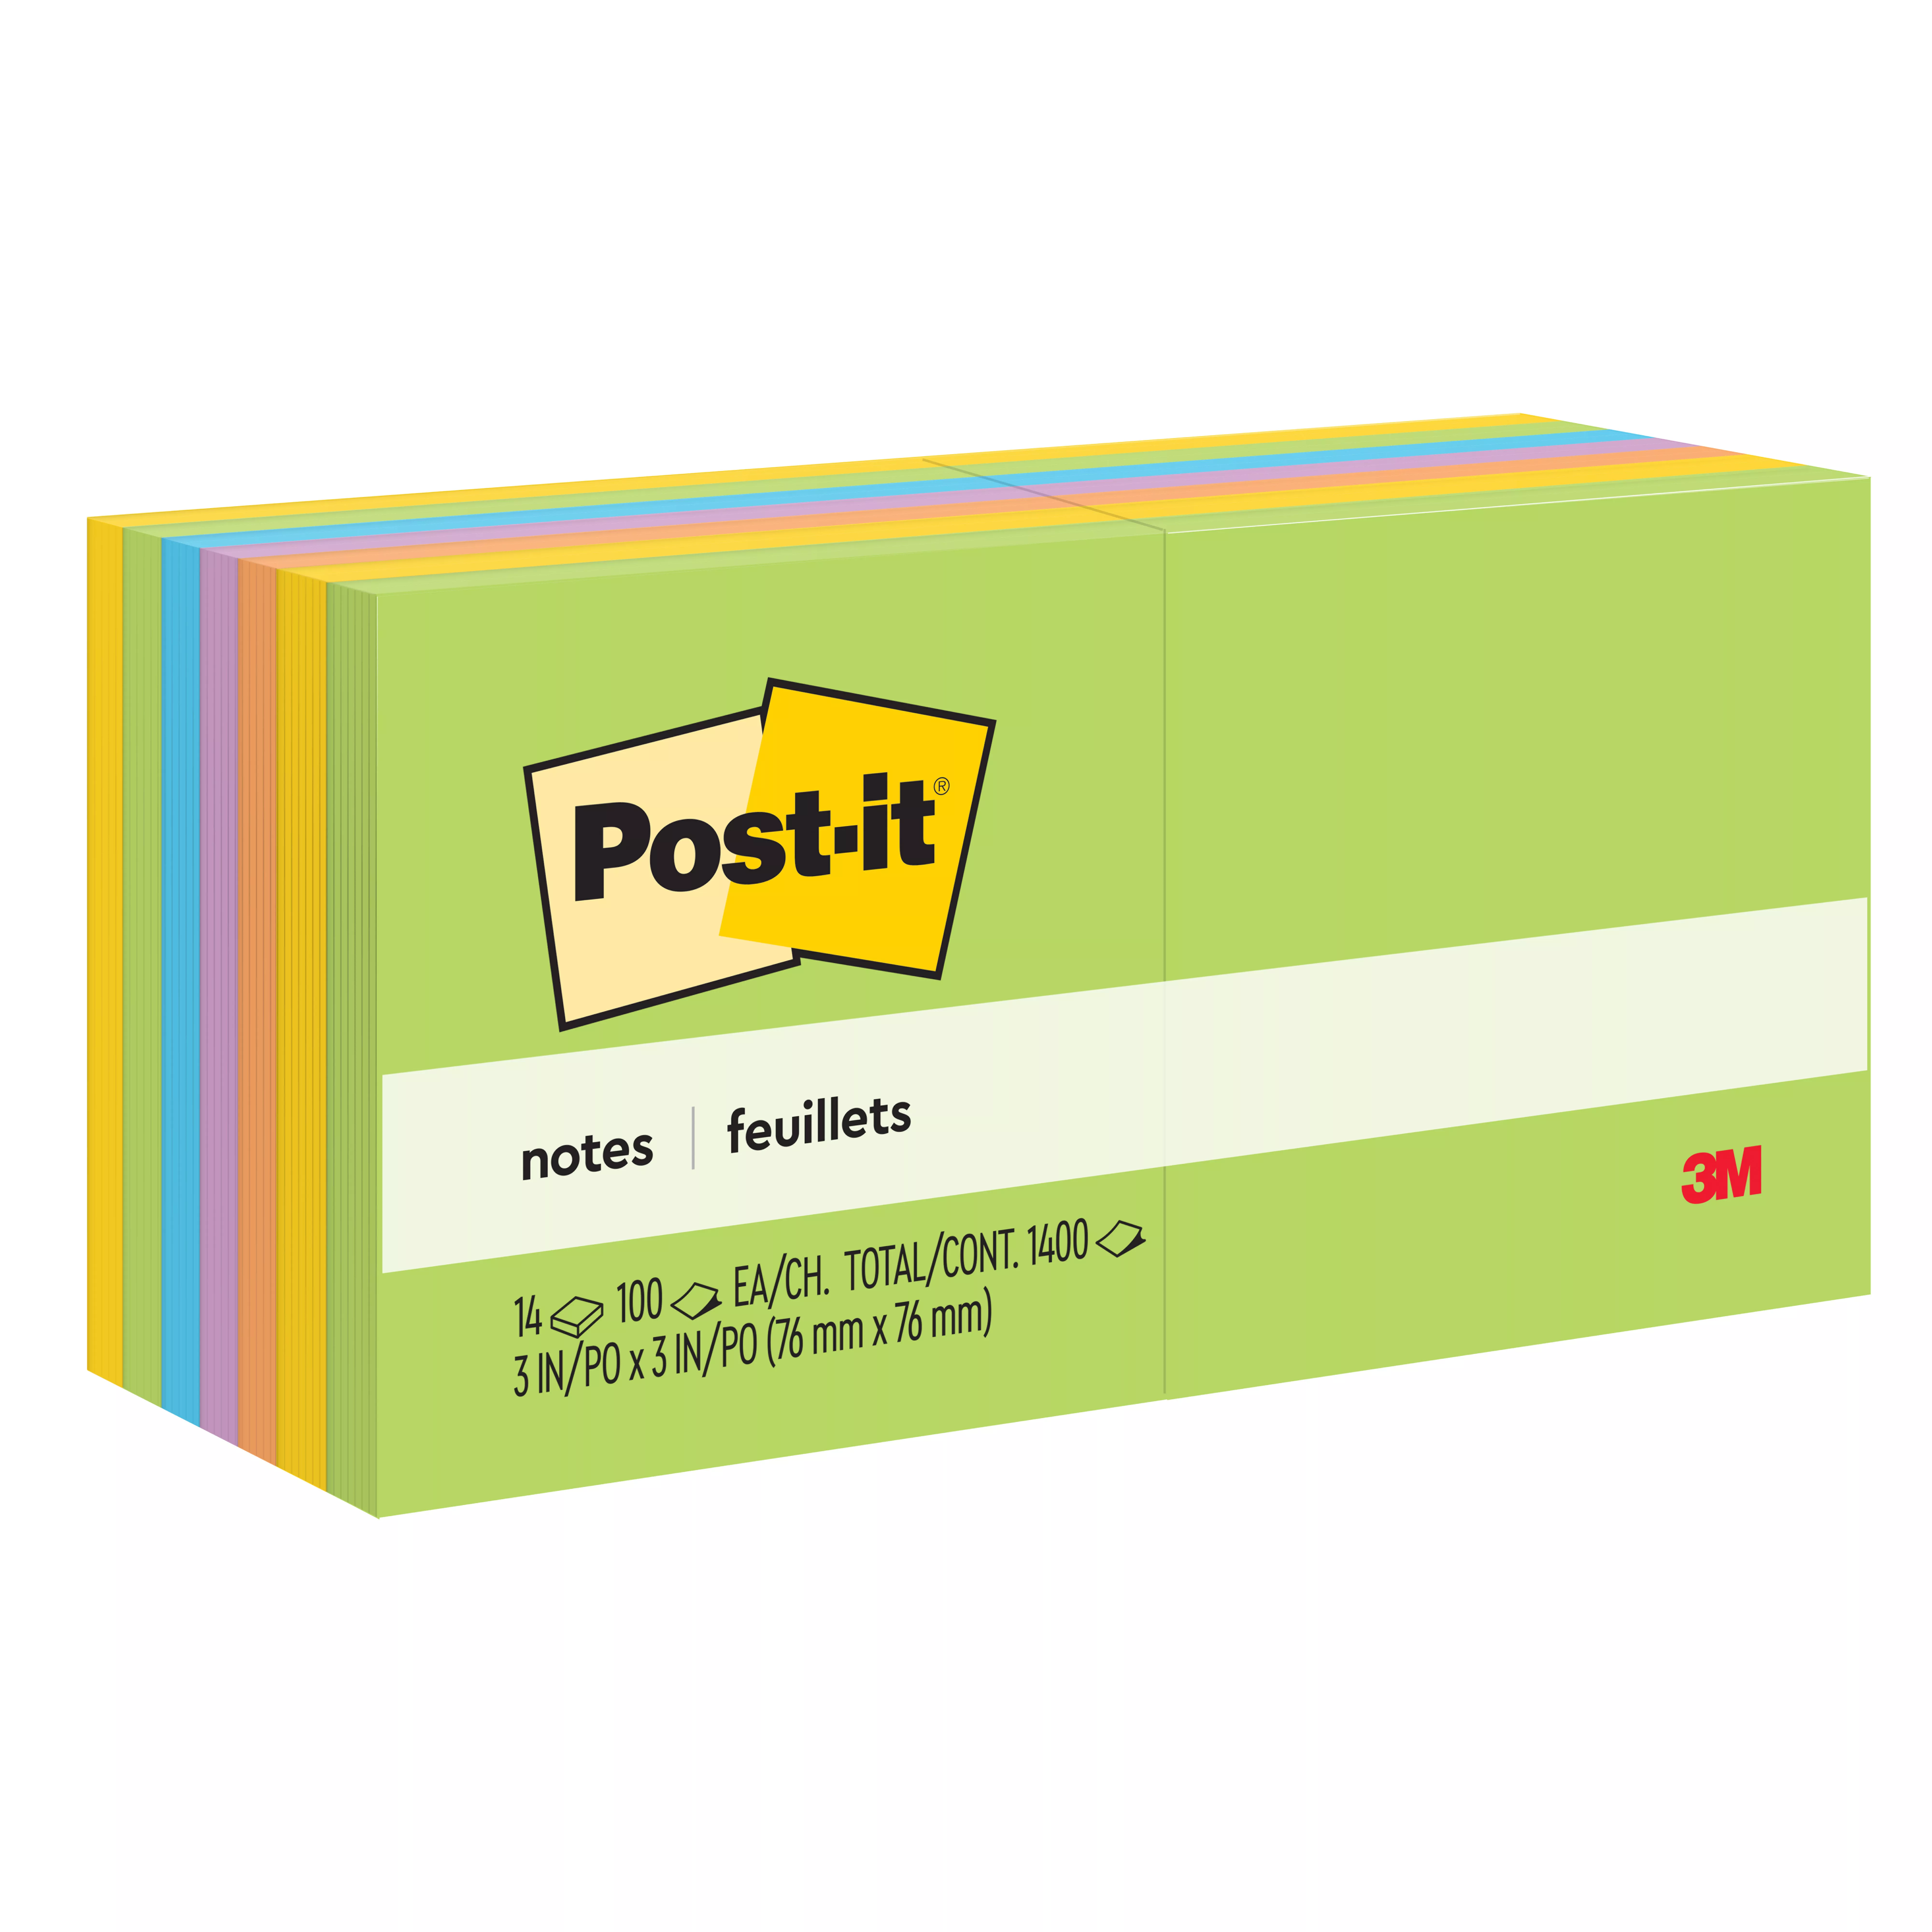 Post-it® Notes 654-14AU, 3 in x 3 in (76 mm x 76 mm), Jaipur colors